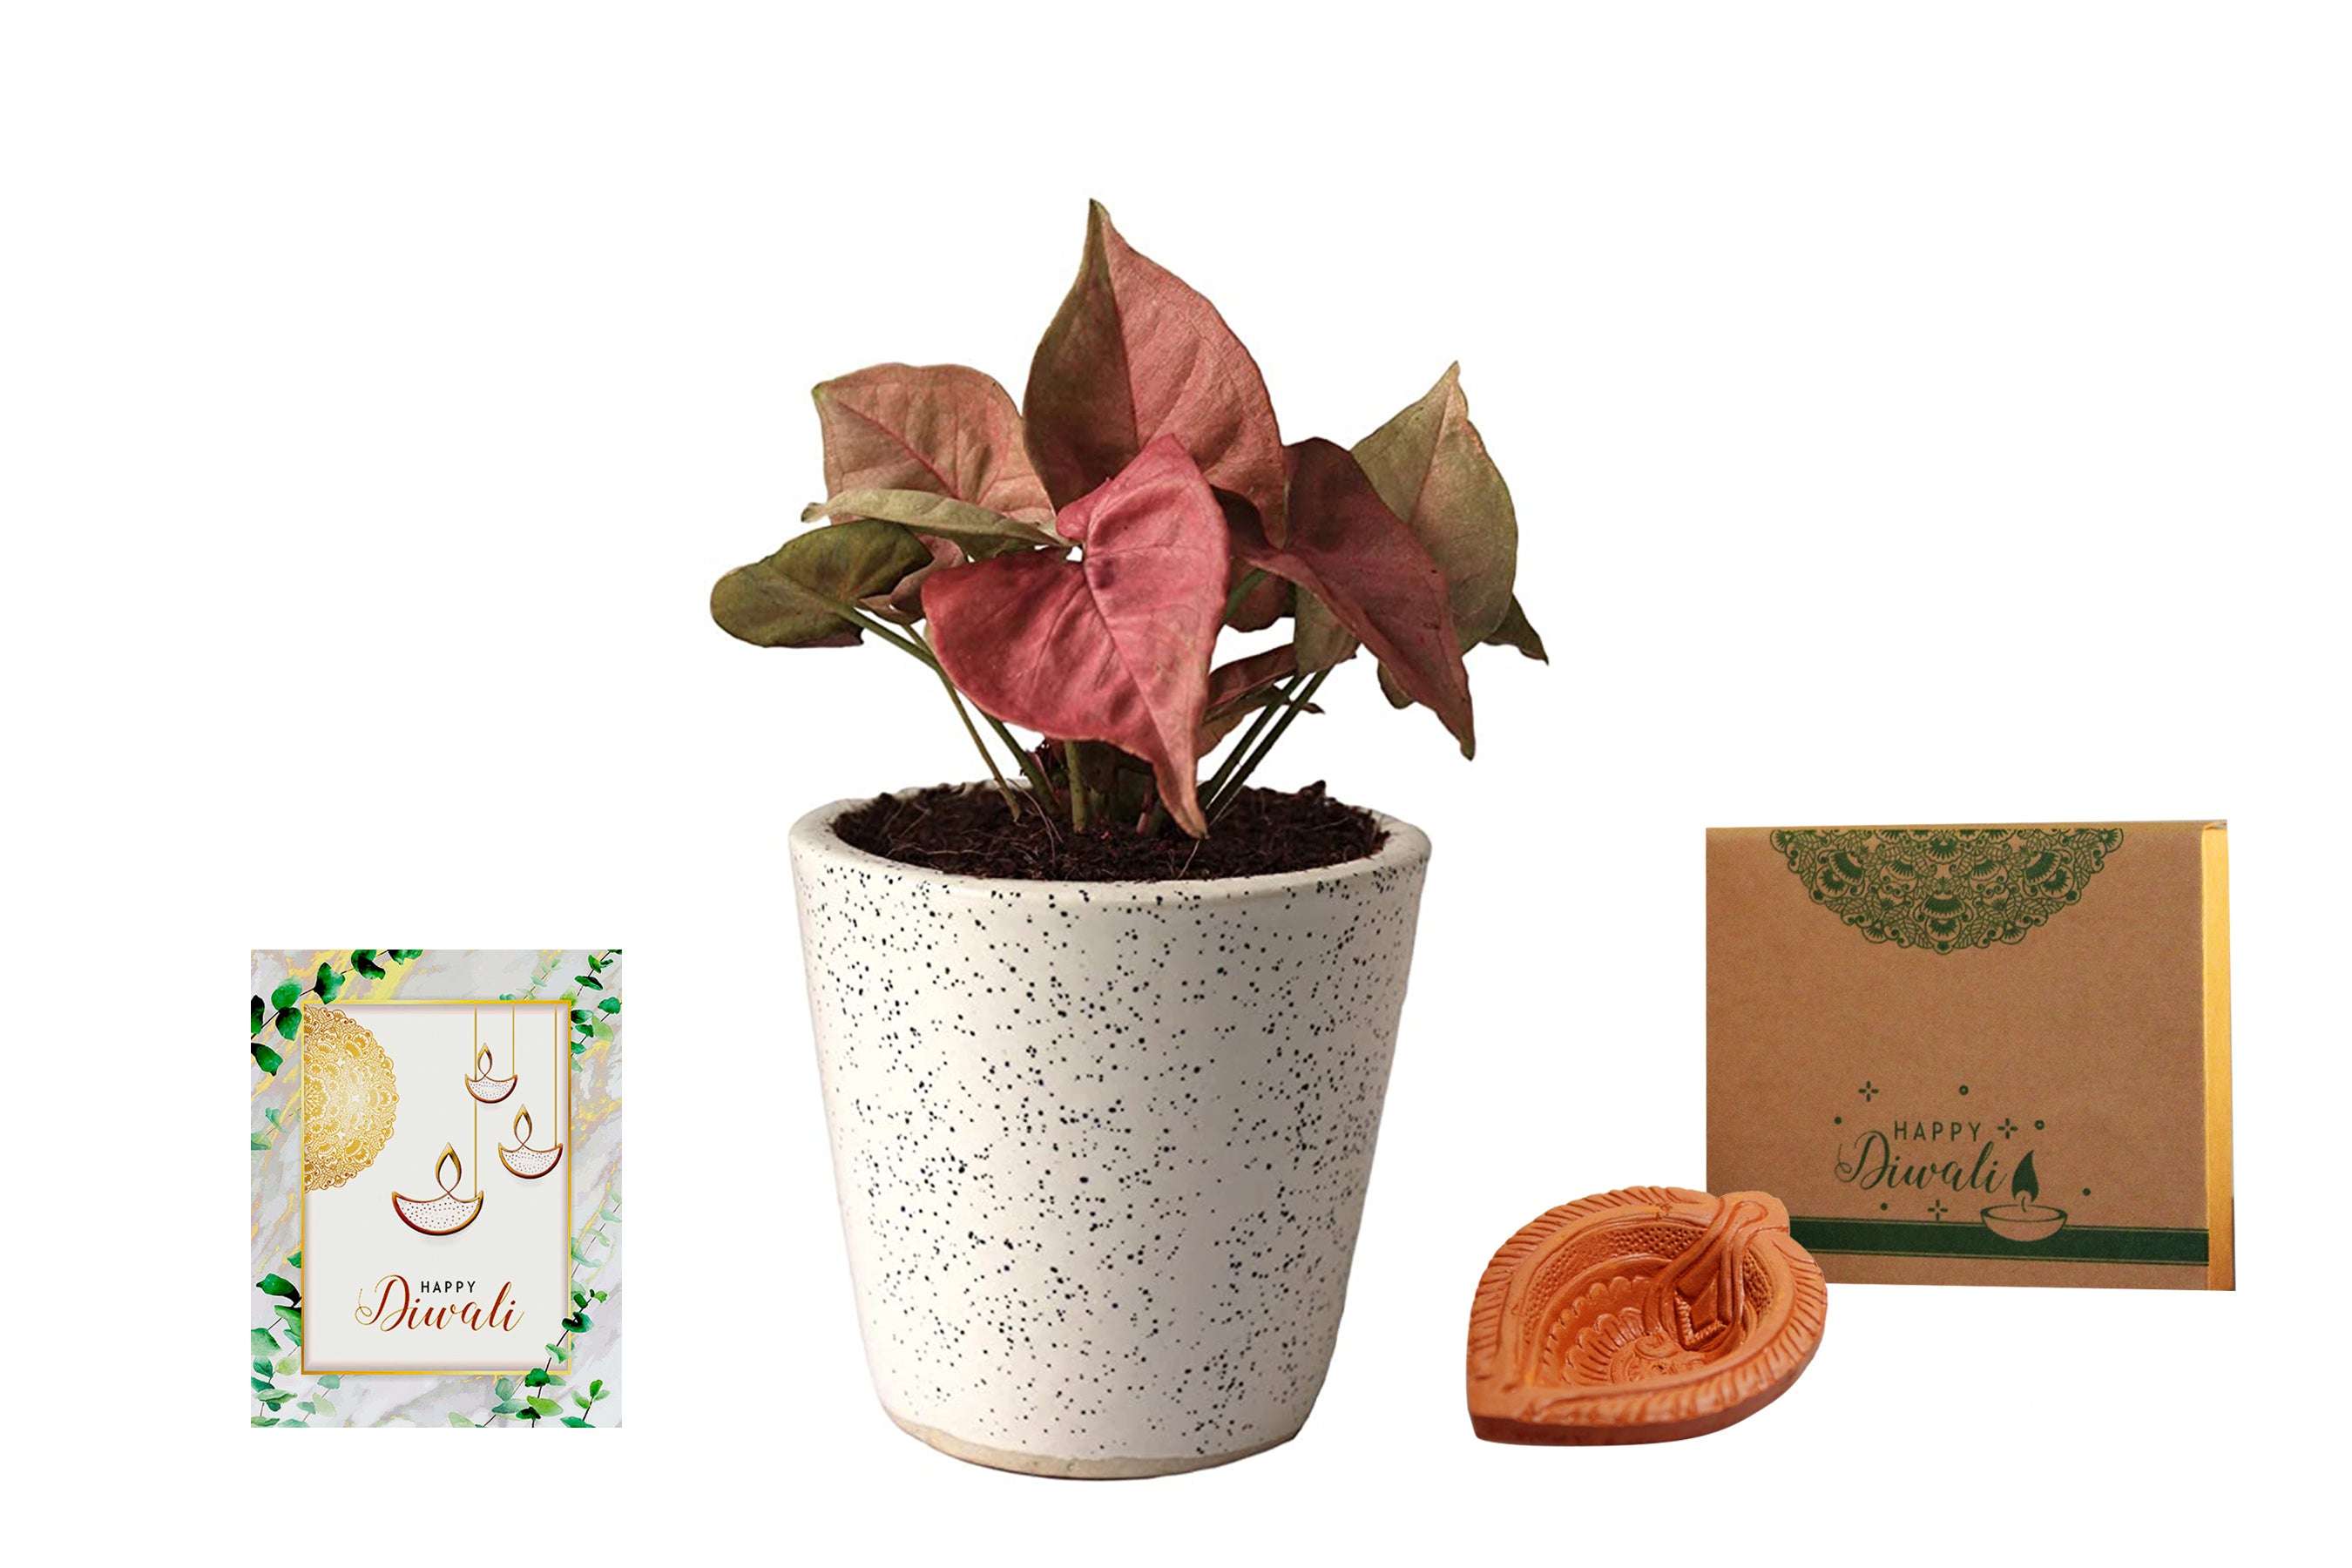 Inexpensive gift ideas for indoor plant lovers - ABC Everyday